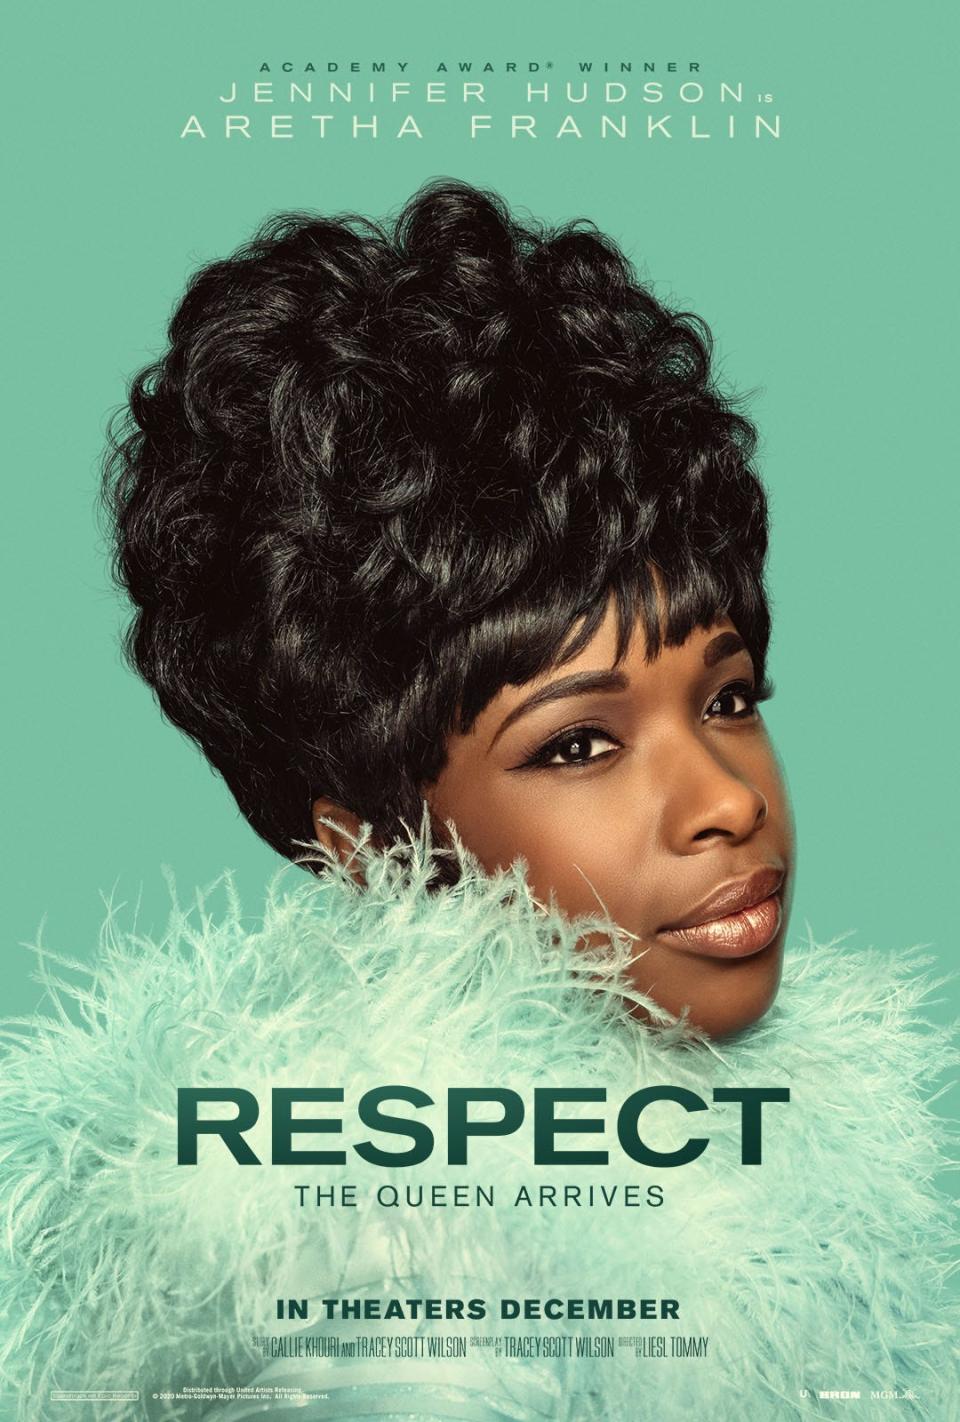 Official movie poster for "Respect," the forthcoming Aretha Franklin biopic starring Jennifer Hudson.